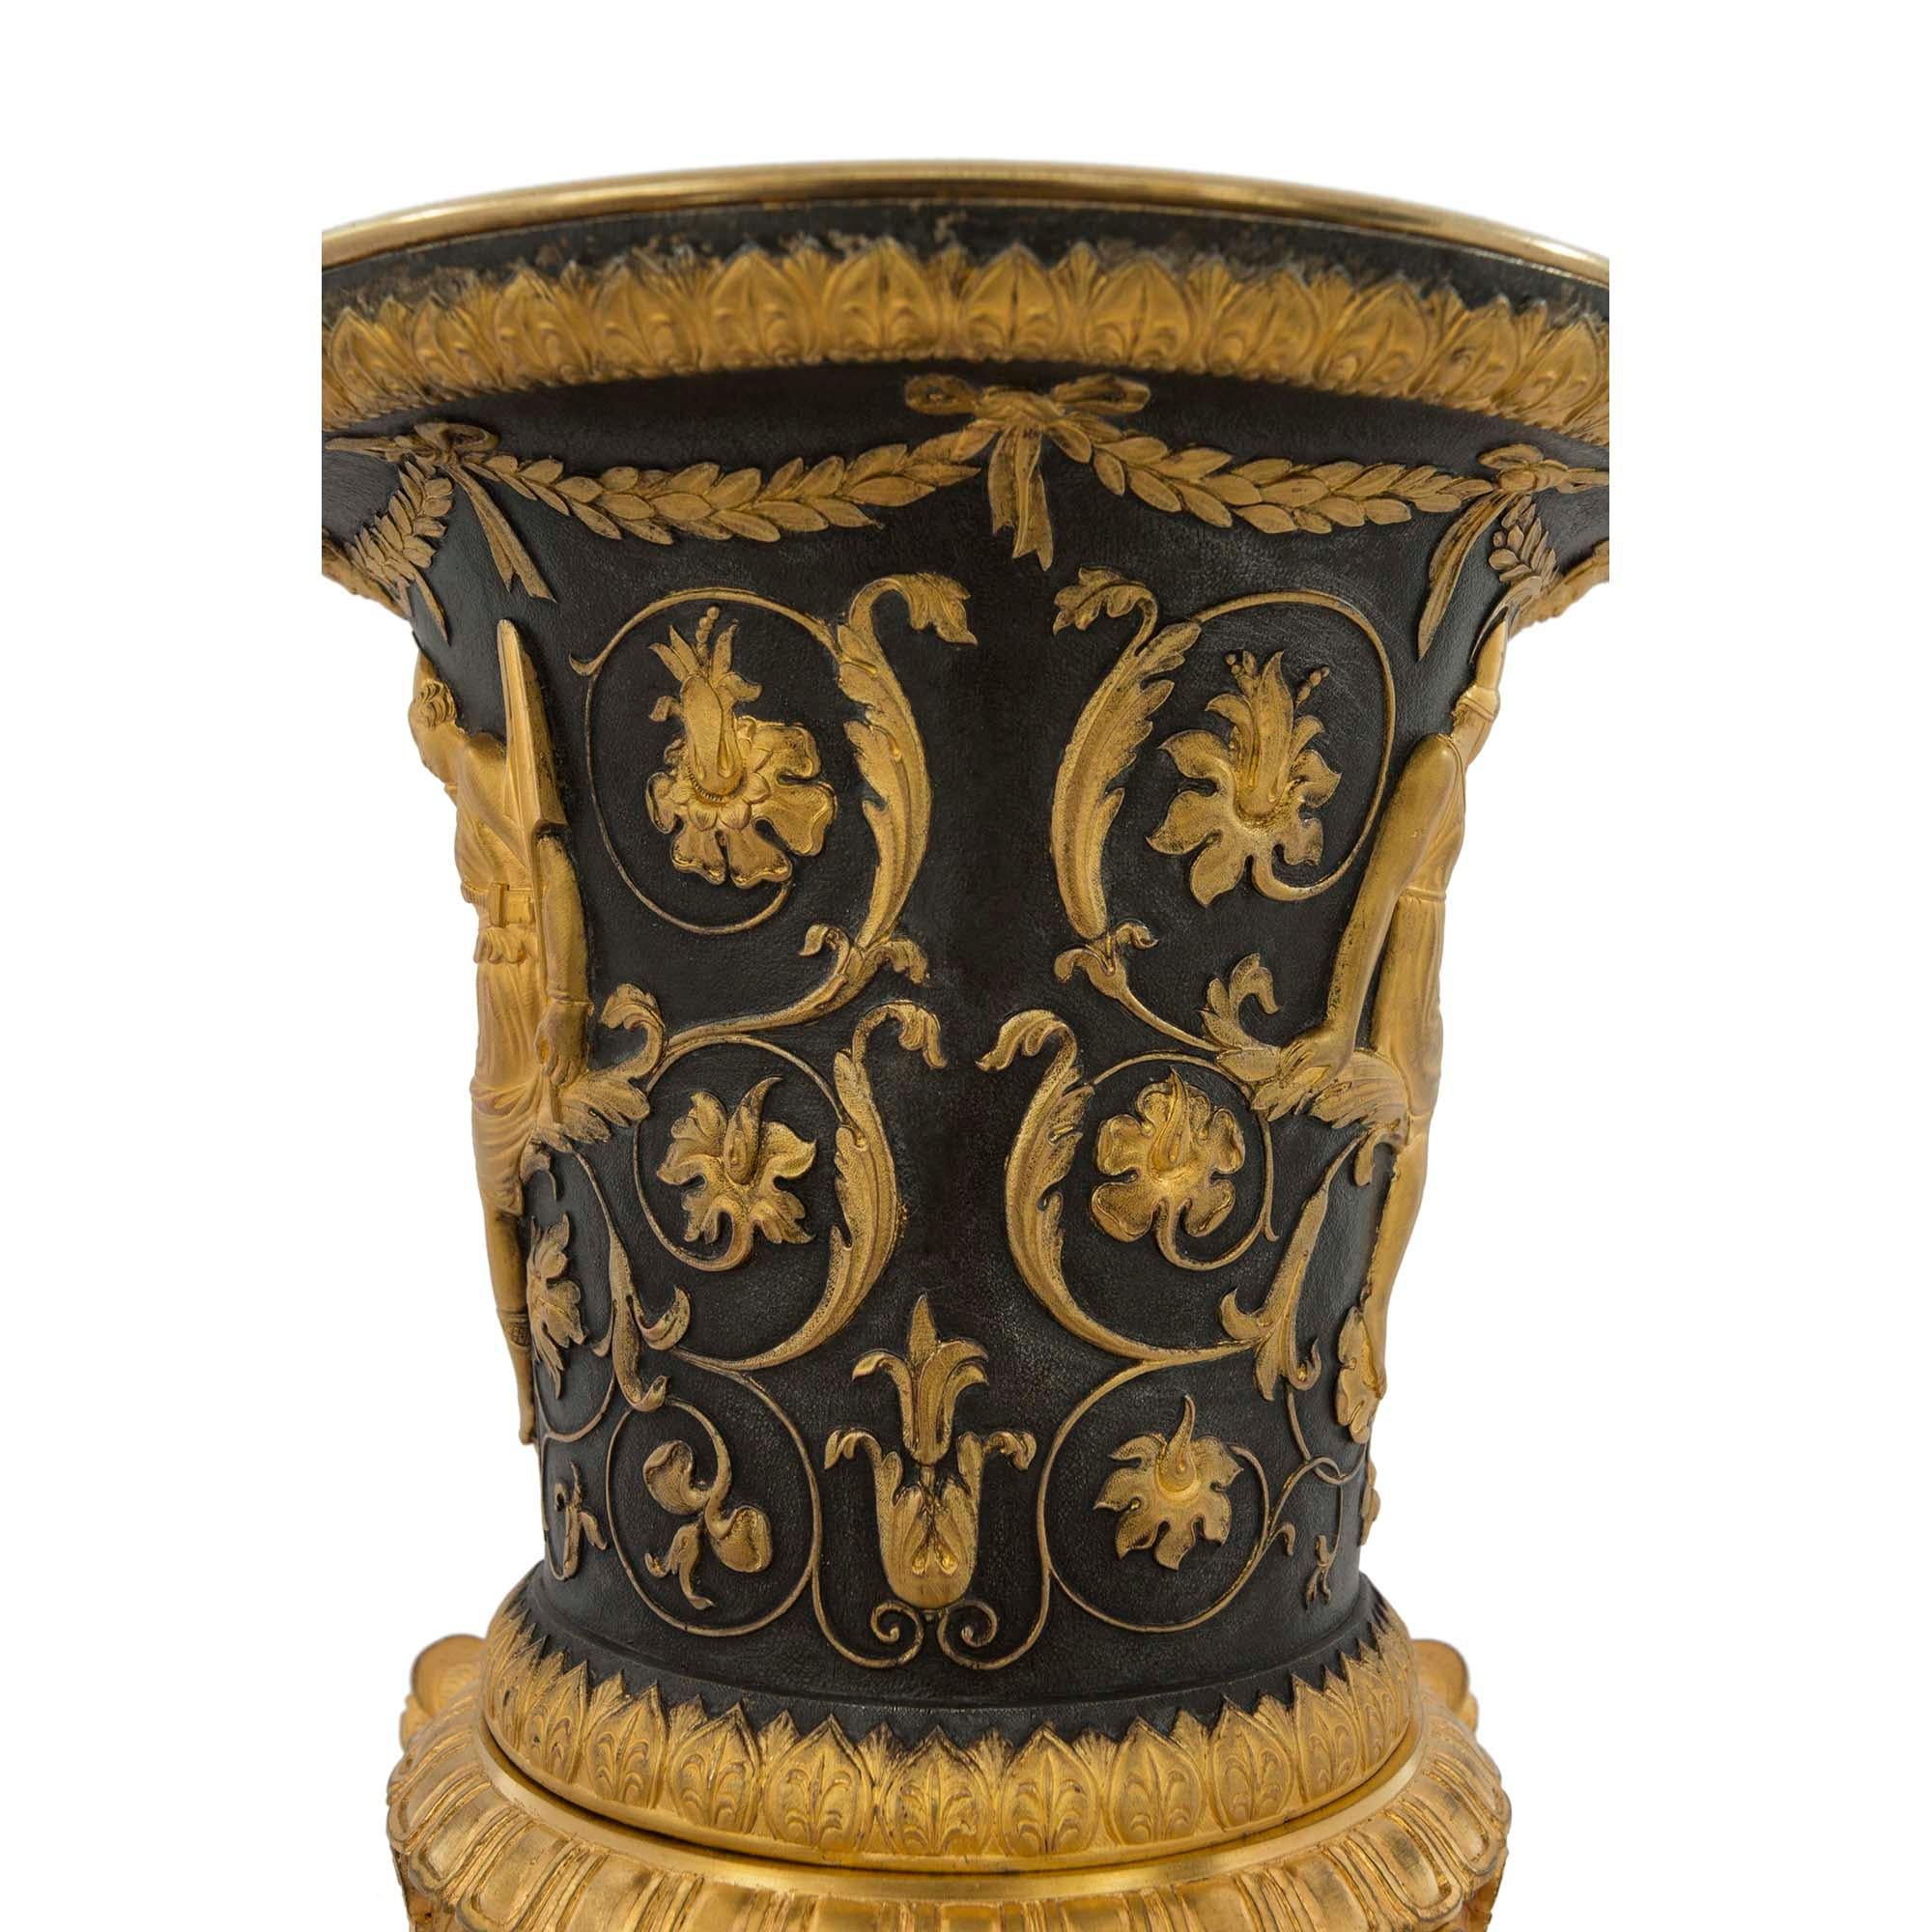 French 19th Century Neoclassical Style Bronze and Ormolu Urn For Sale 3